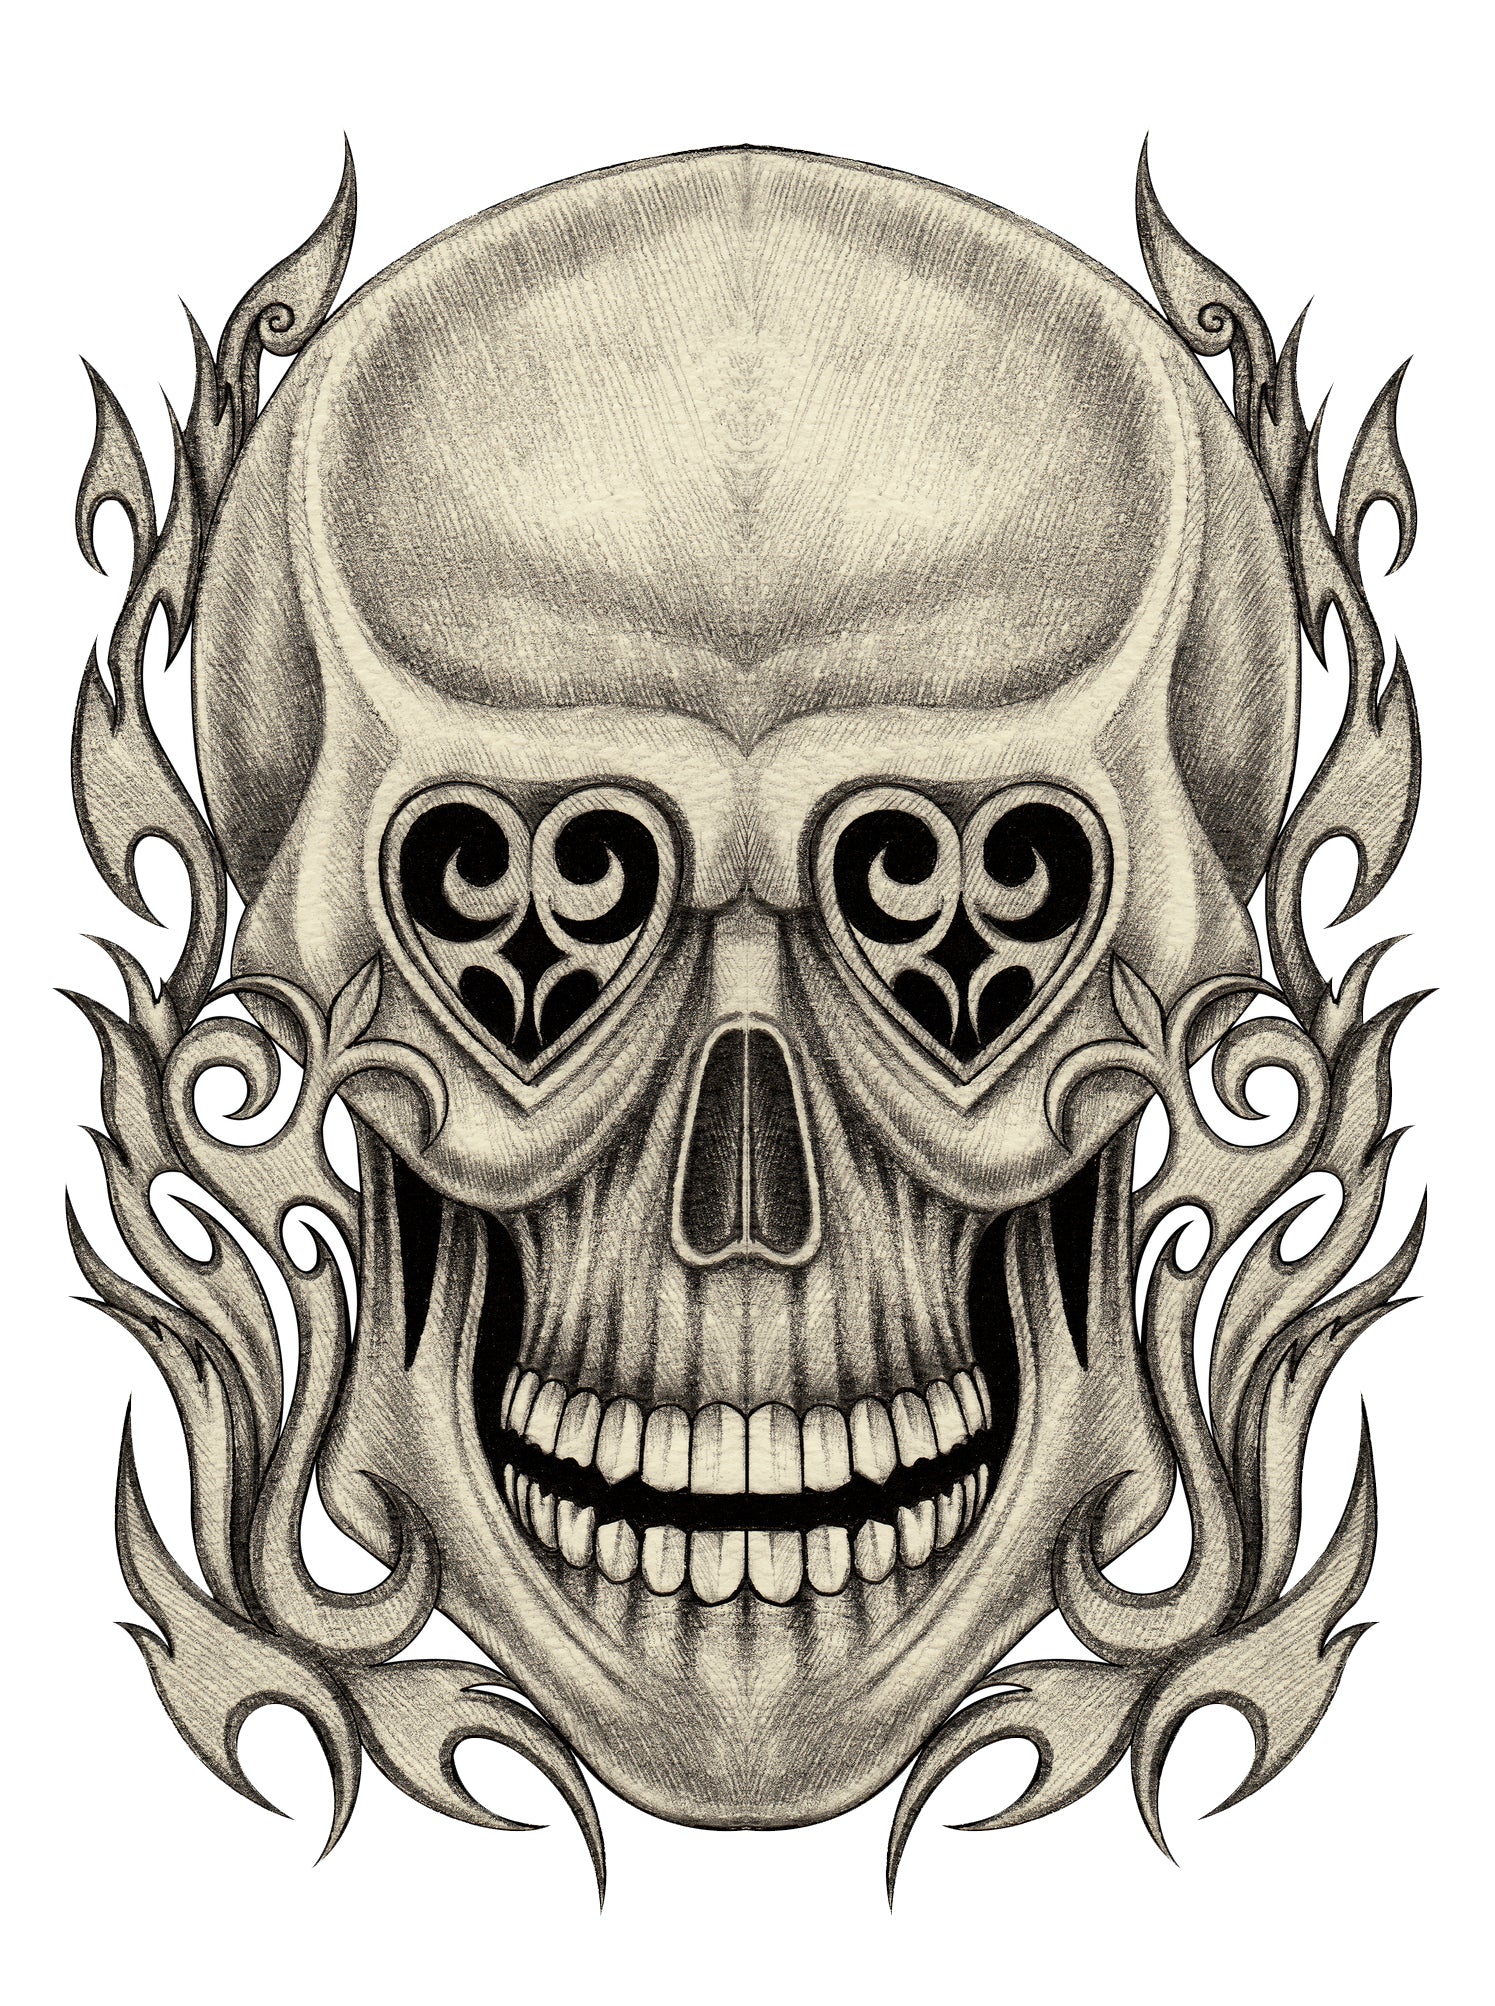 Pencil Sketch Skull with Heart Eyes and Fire Swirls Vinyl Decal Sticker